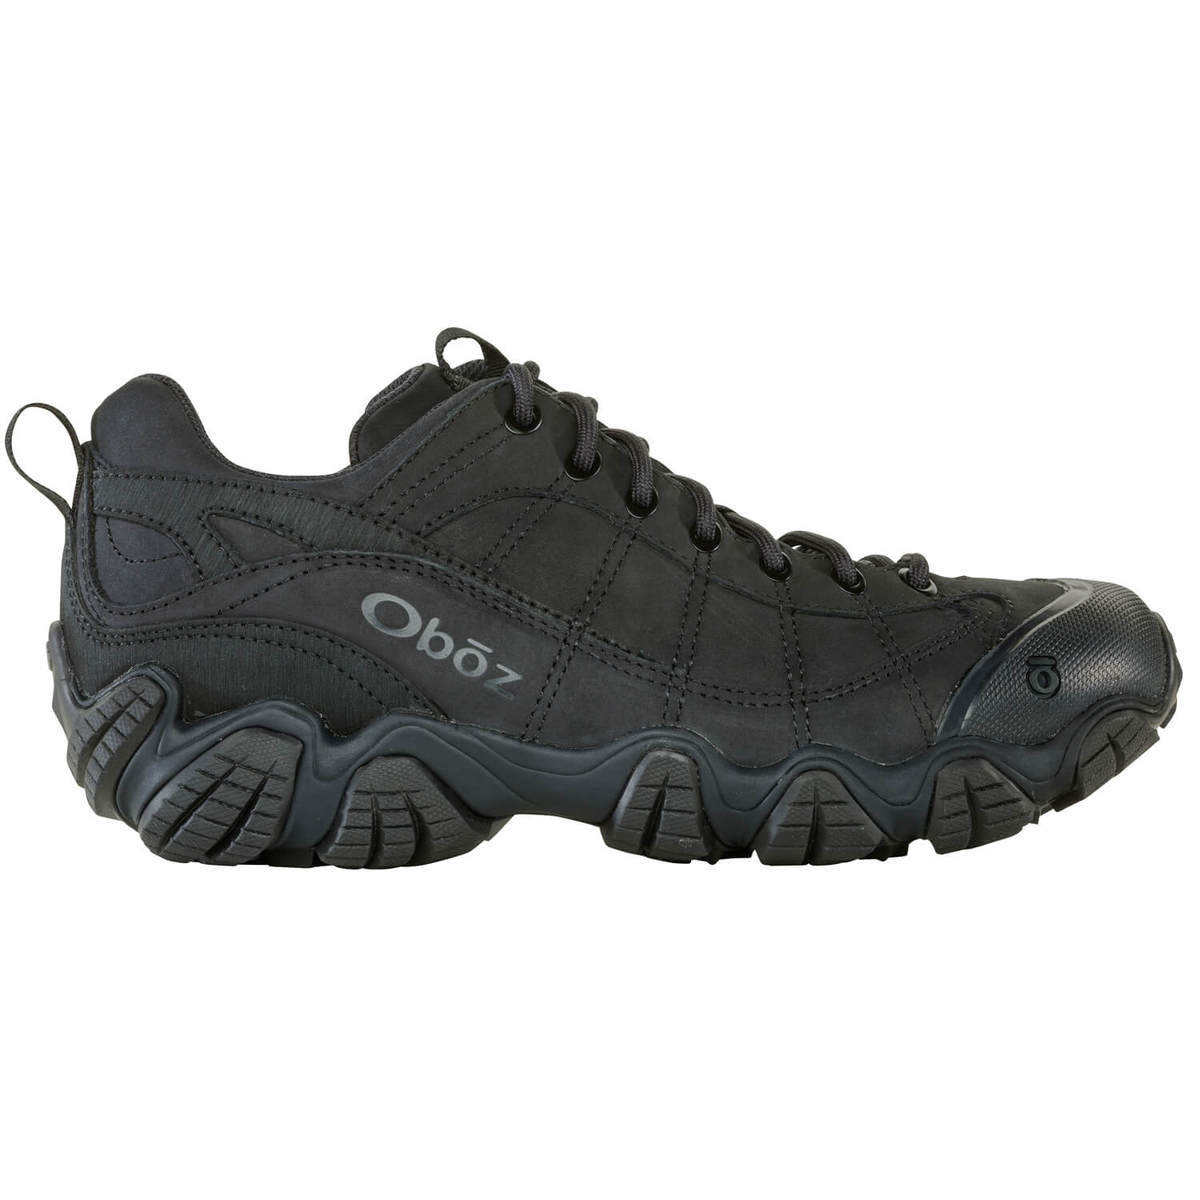 Oboz Men's Firebrand II Leather Low Hiking Shoes - Black - Size 10 ...